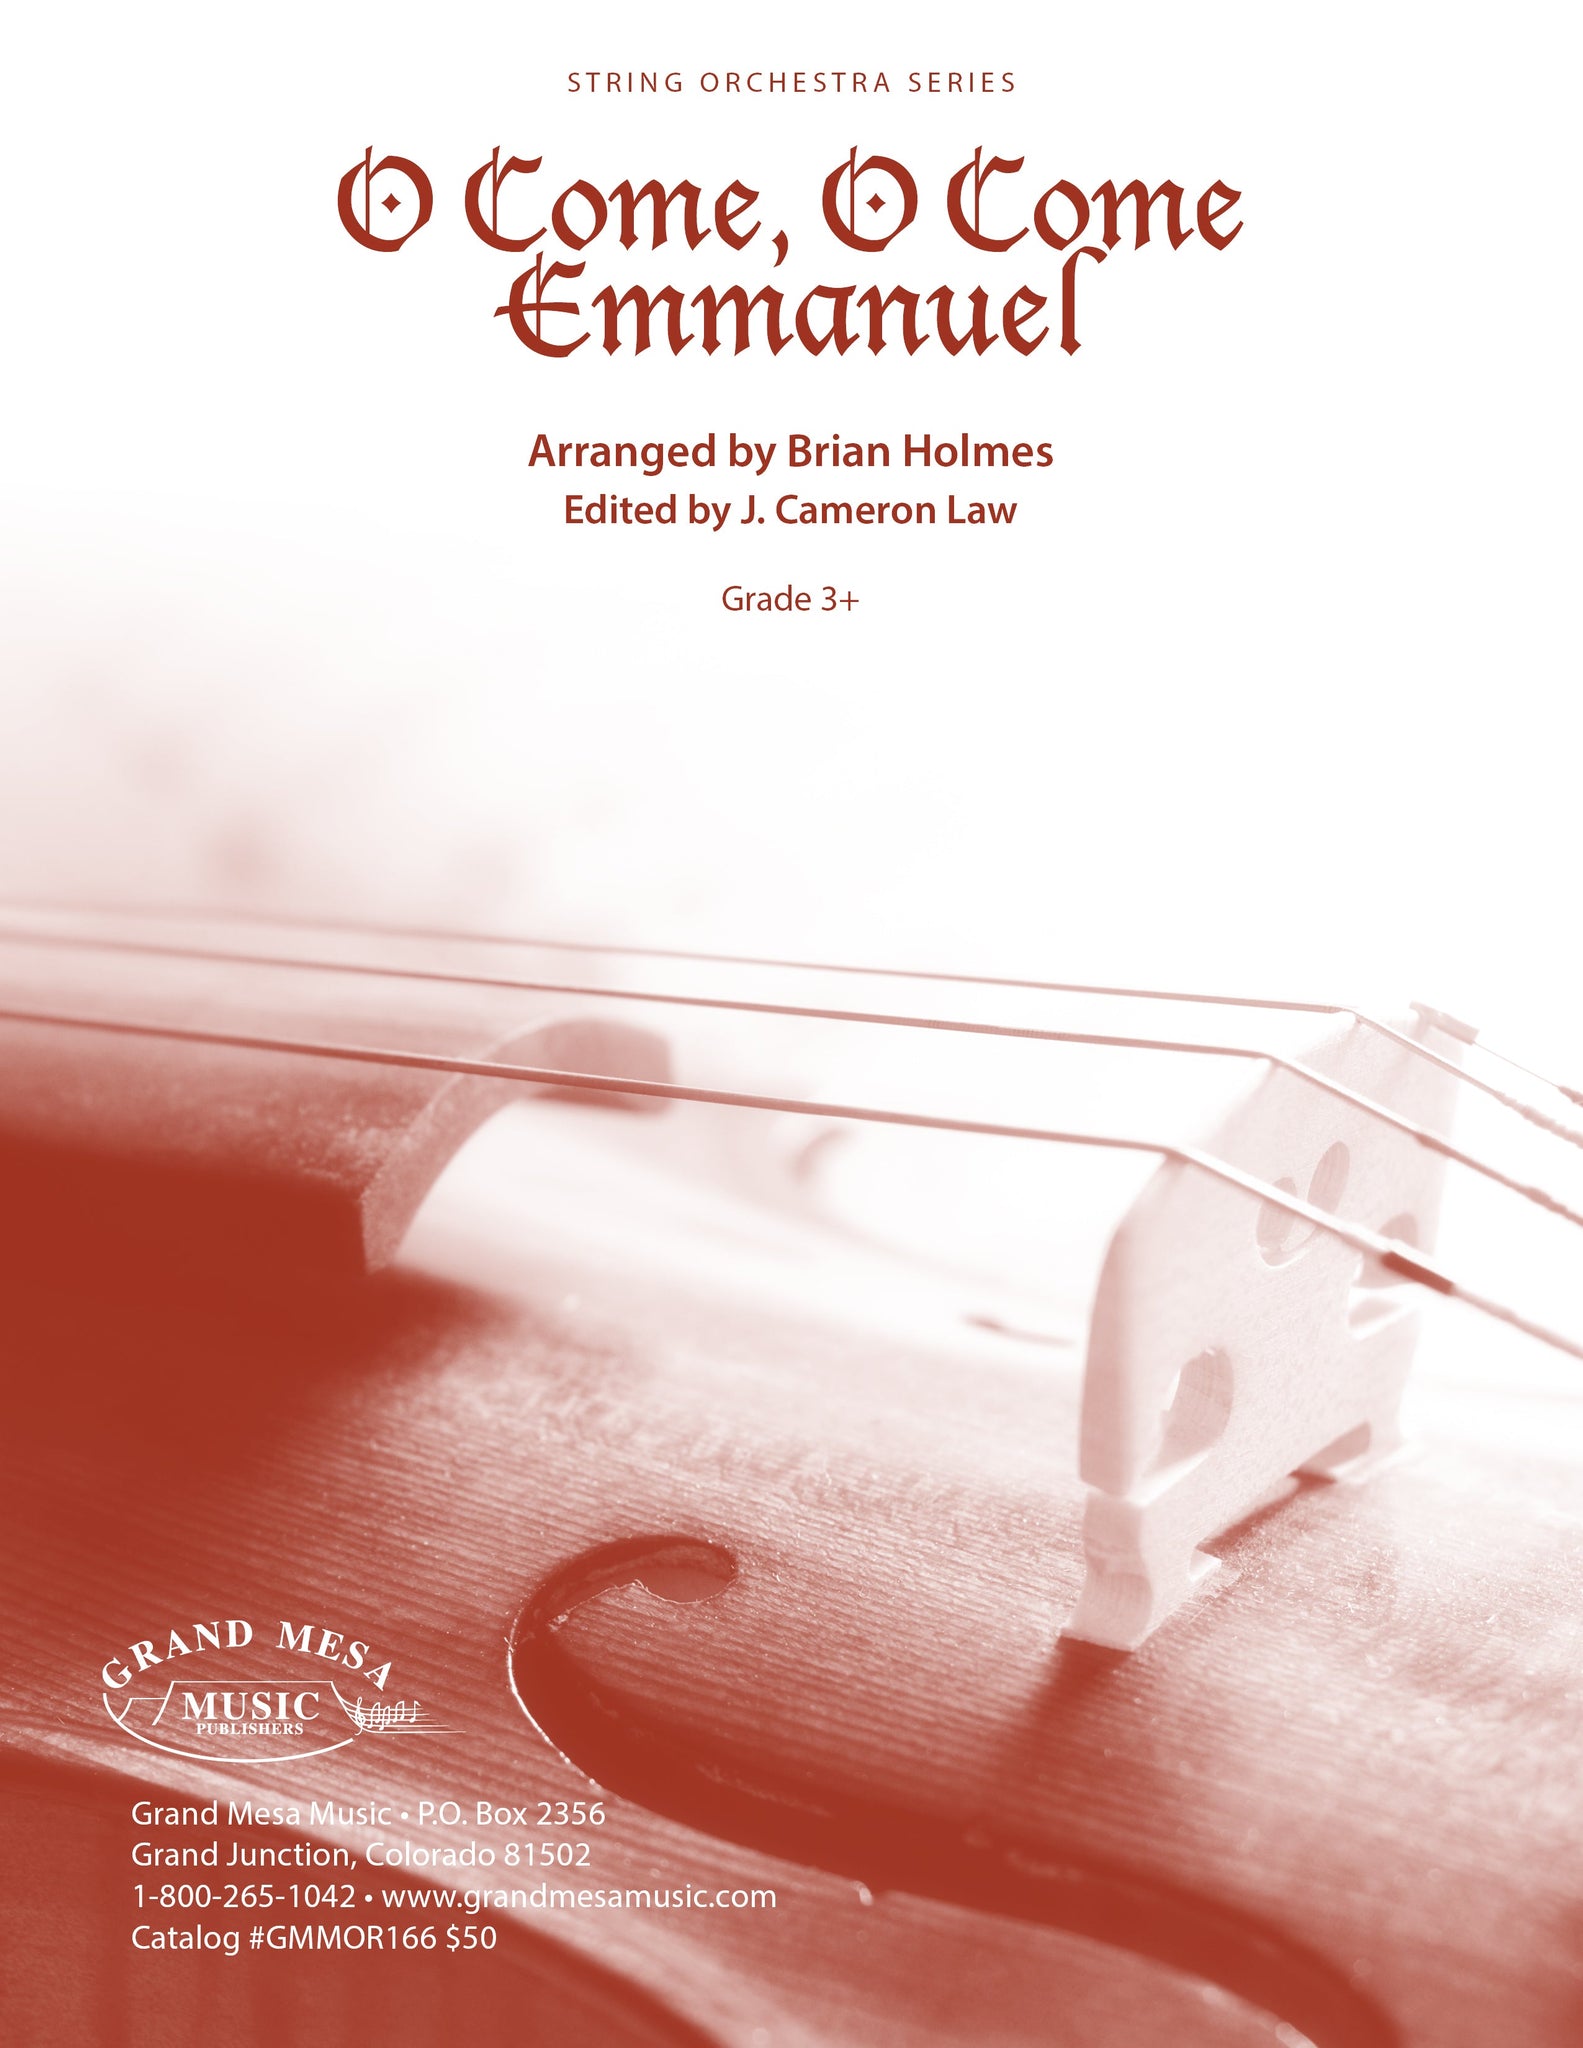 Strings sheet music cover of O Come, O Come Emmanuel, arranged by Brian Holmes.